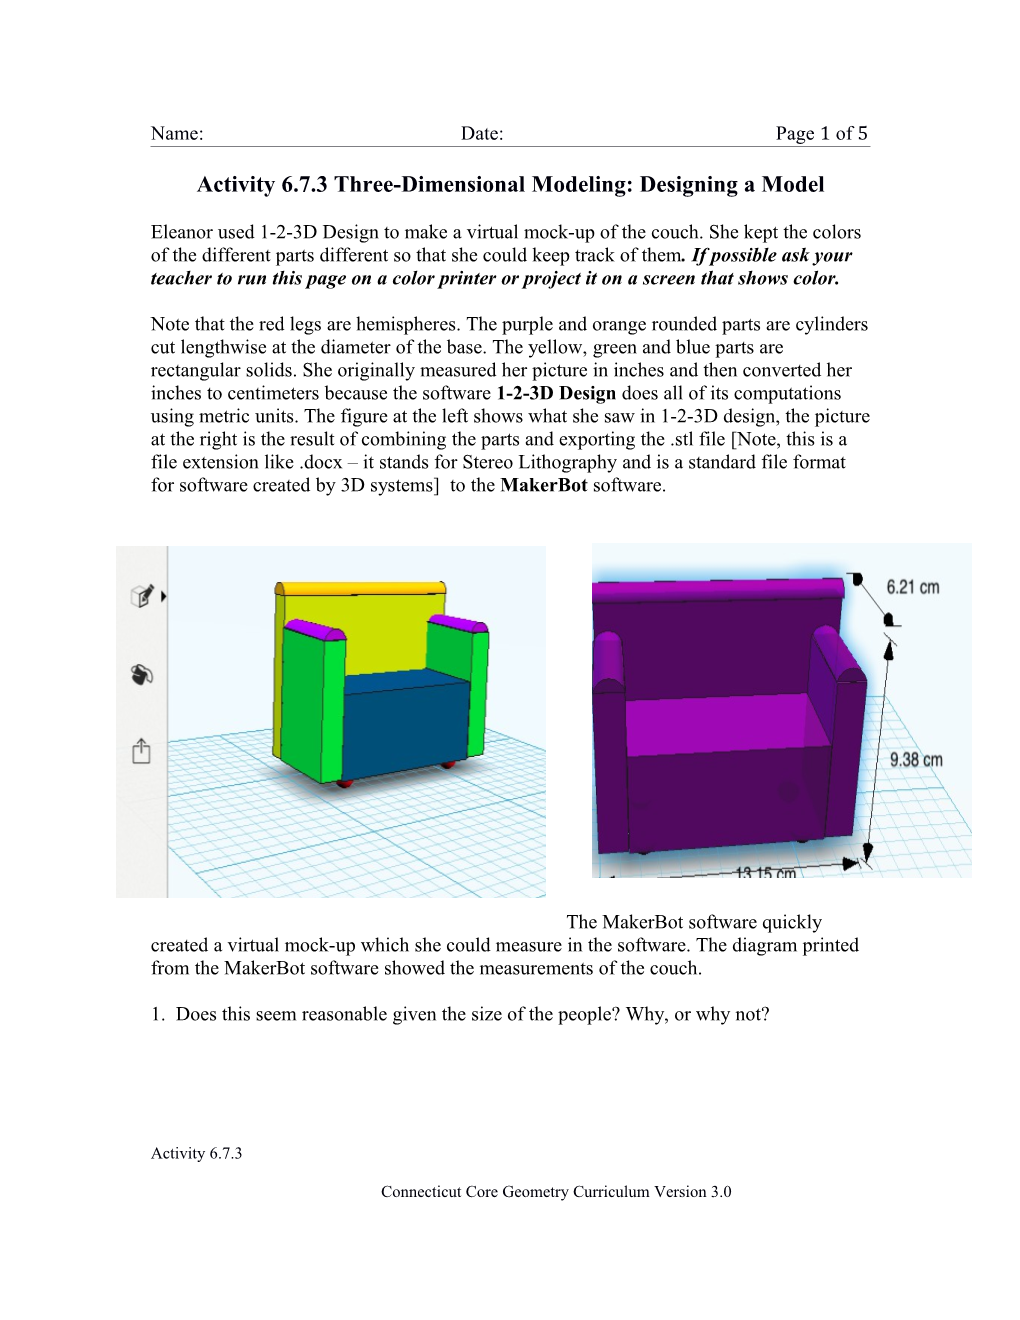 Activity 6.7.3 Three-Dimensional Modeling: Designing a Model